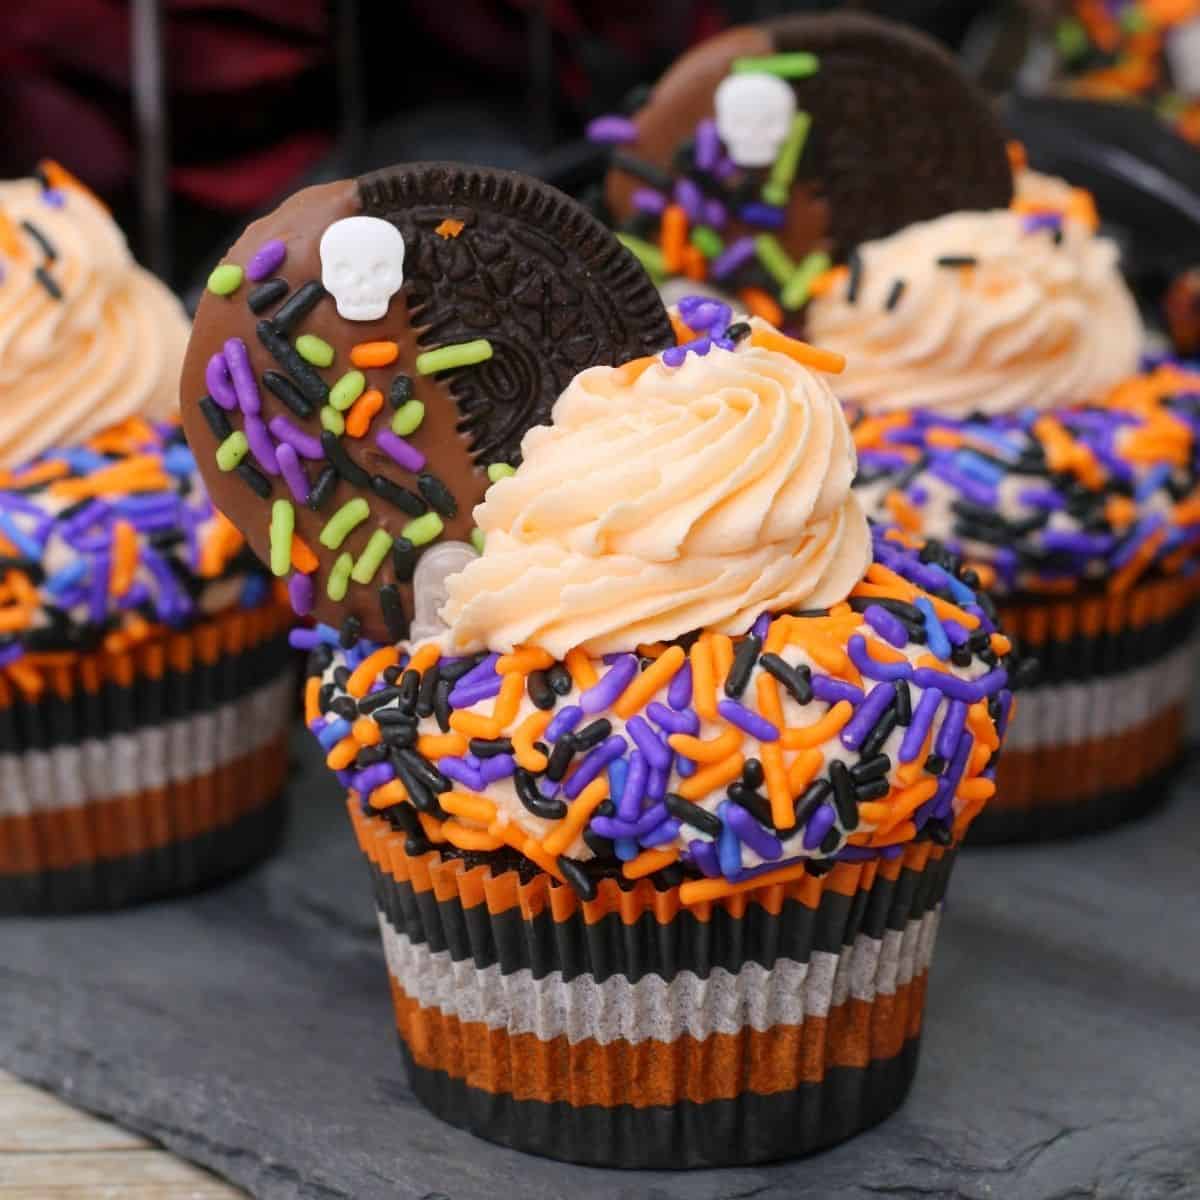 Cupcakes with a halloween theme with orange and purple sprinkles.